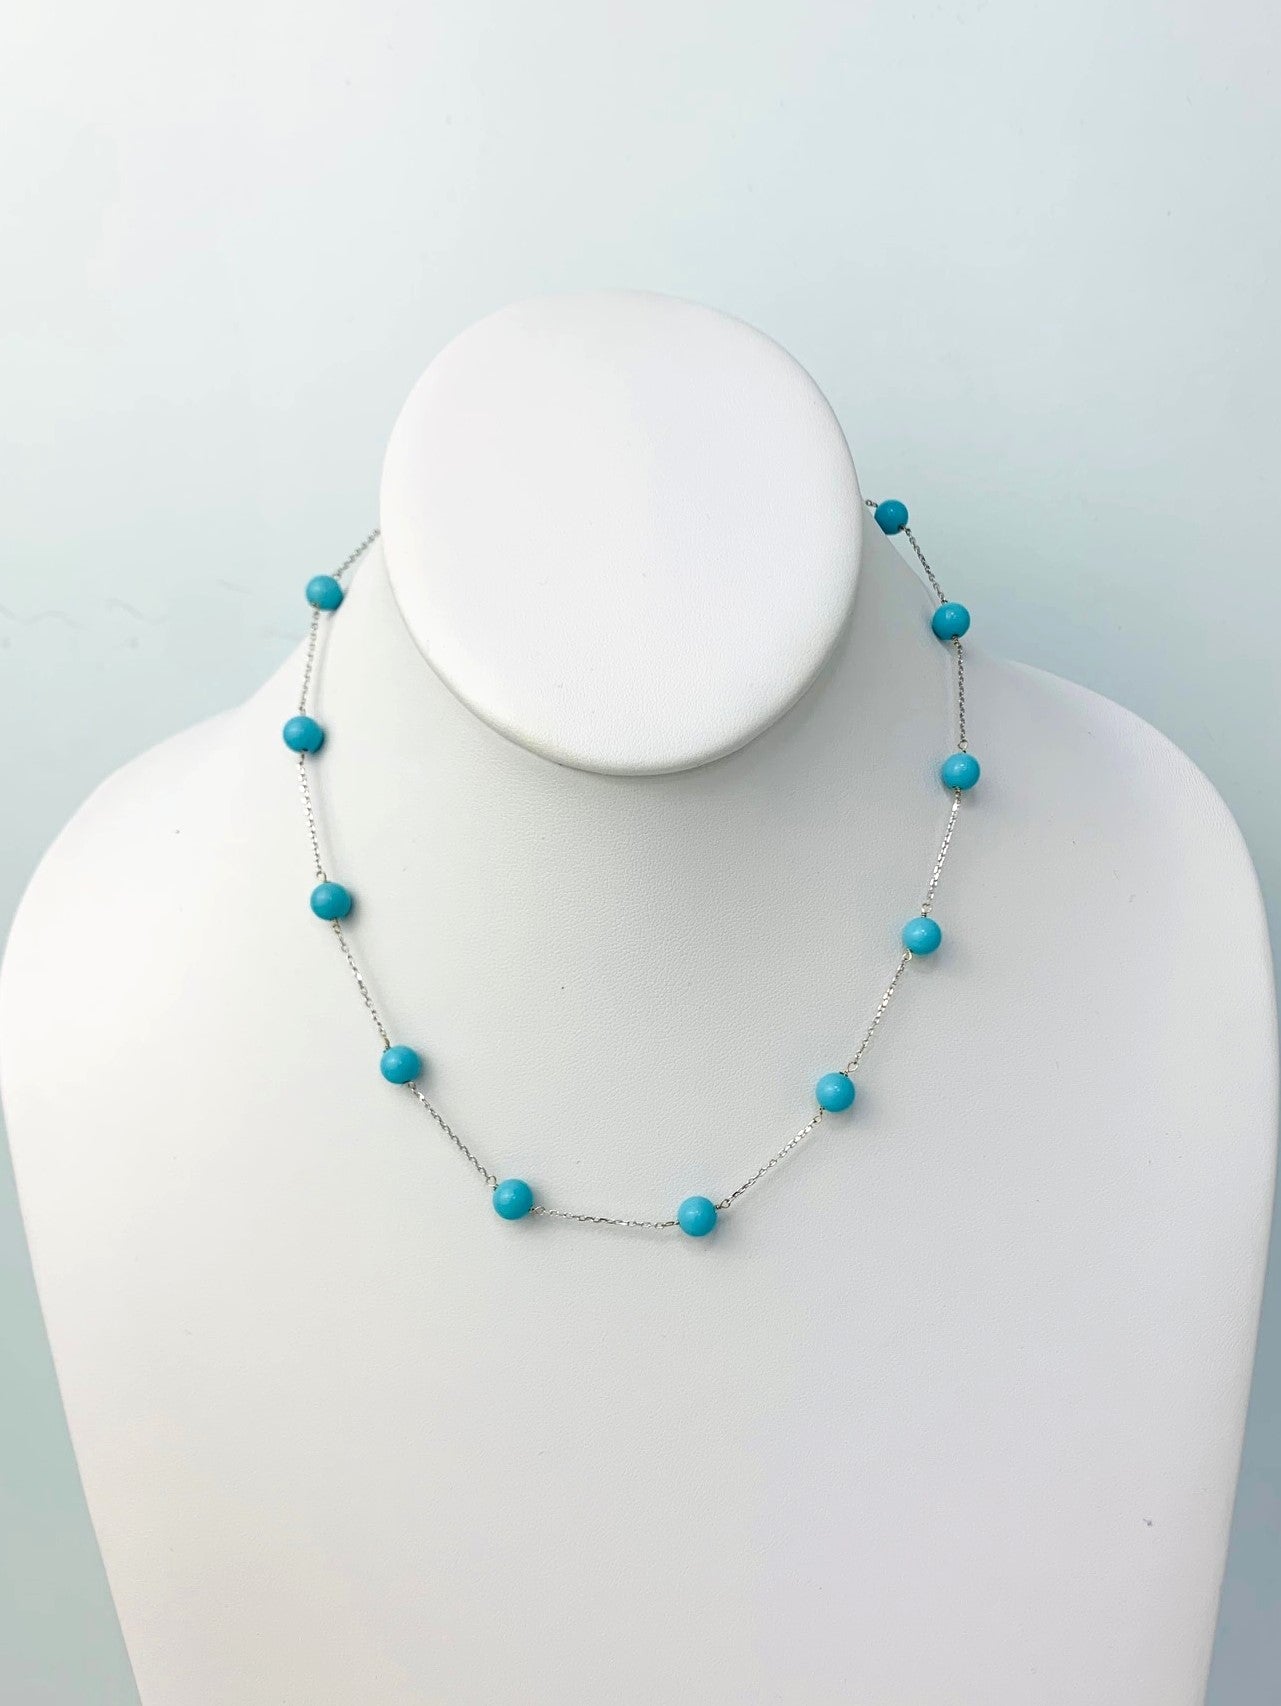 16" Turquoise Station Necklace in 14KW - NCK-049-TNCGM14W-TQ-16-02779